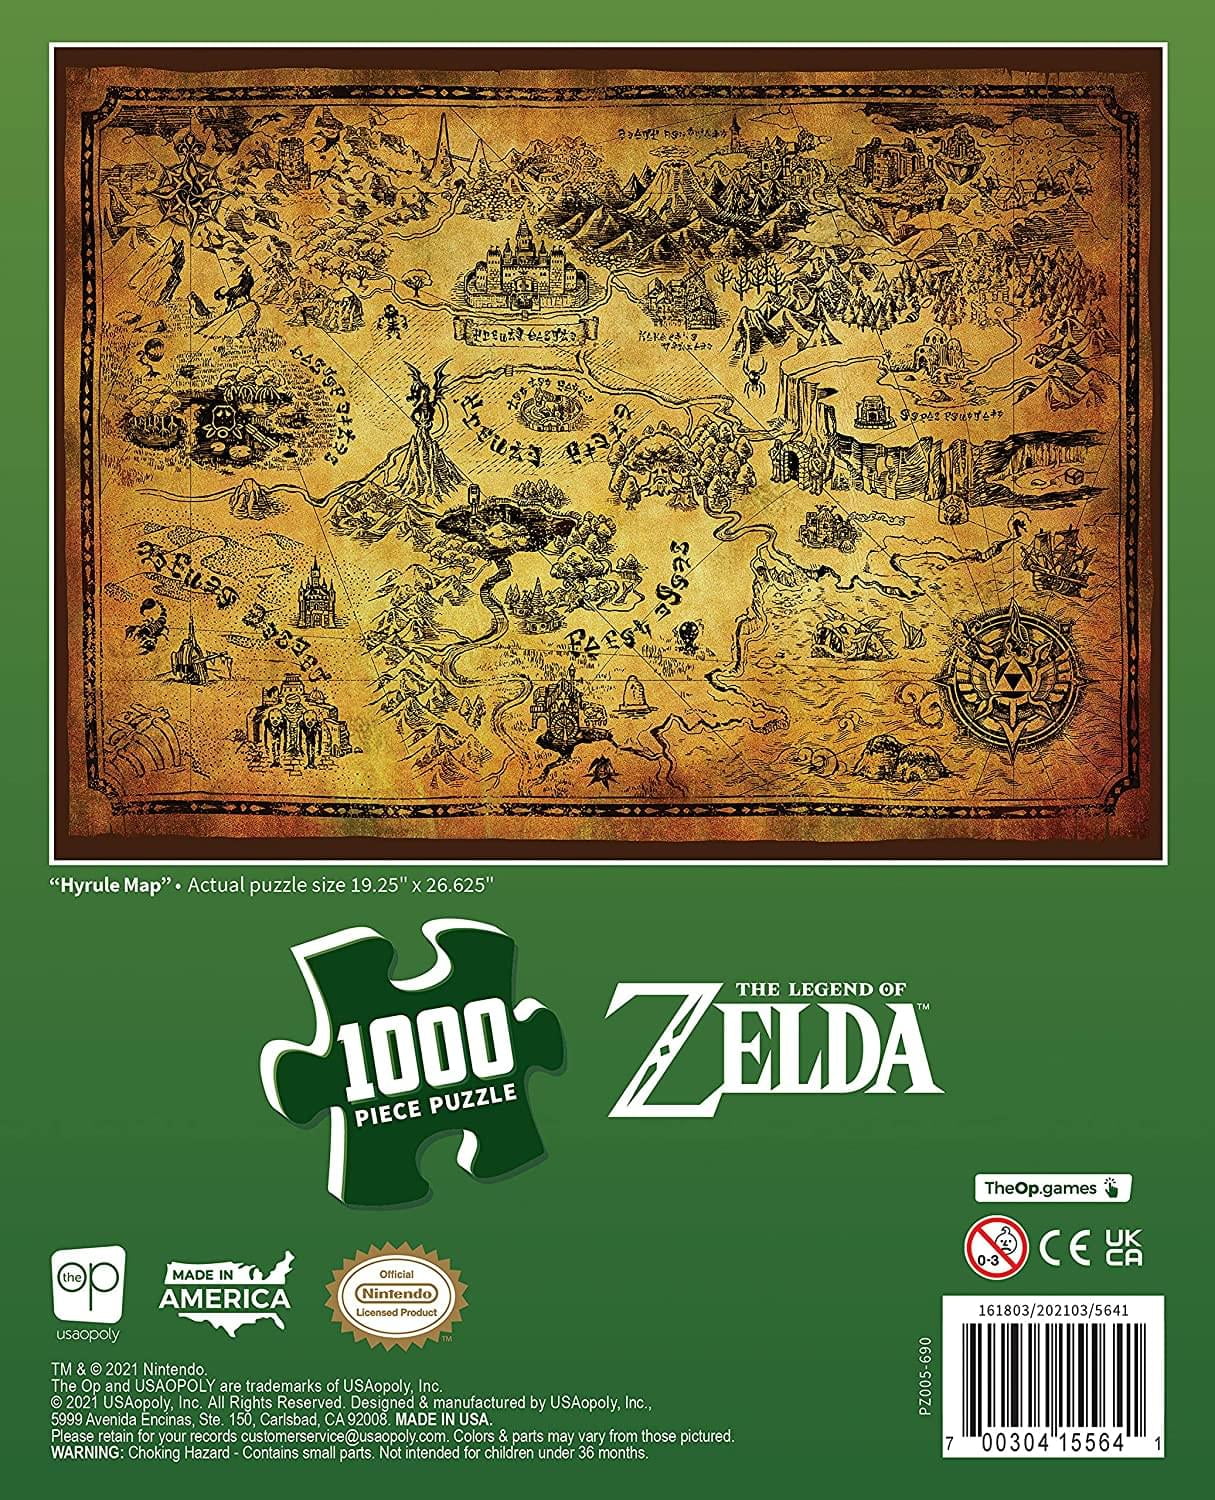 ⭐The Legend of Zelda Jigsaw Puzzle Hyrule Map (1000 pieces) - buy